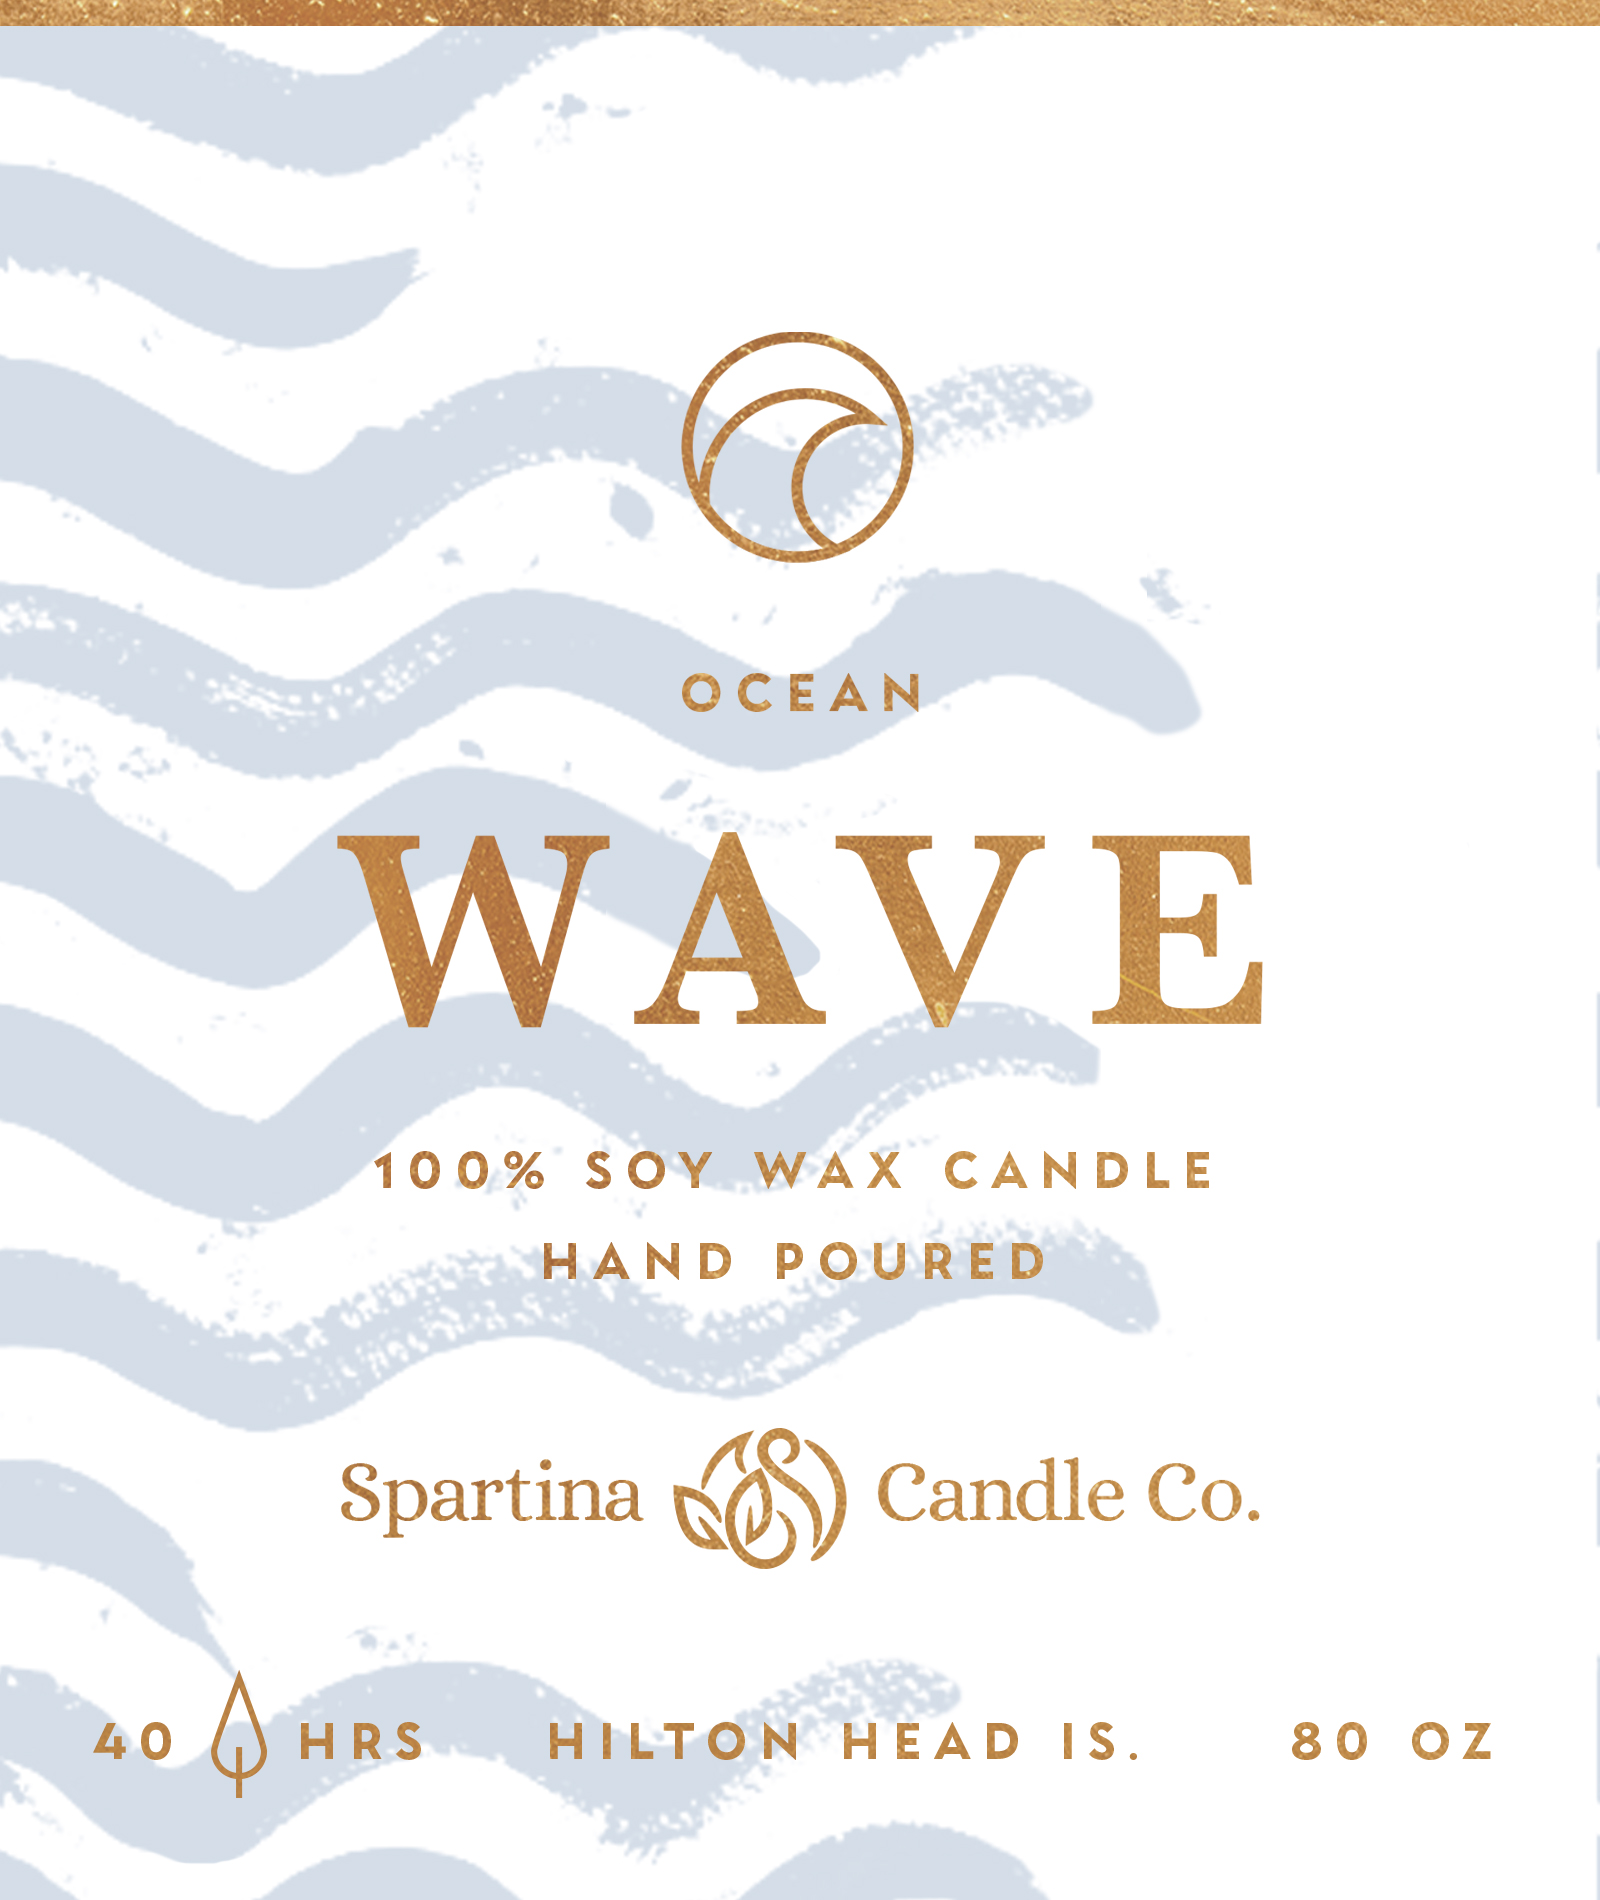 Wave Candle Box Package Design